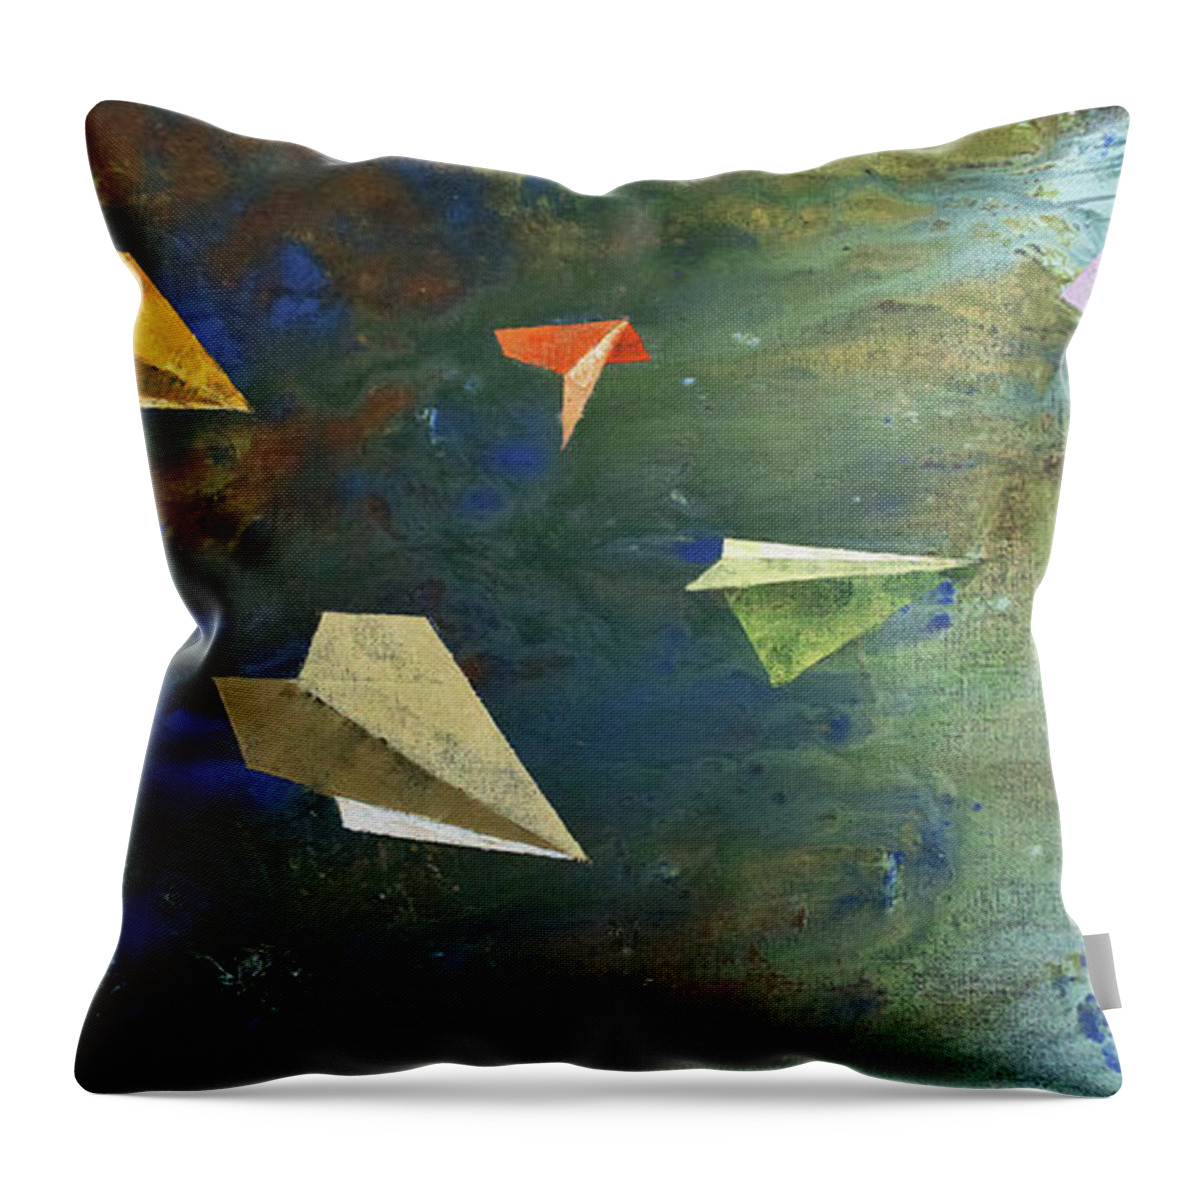 Origami Throw Pillow featuring the painting Paper Airplanes by Michael Creese